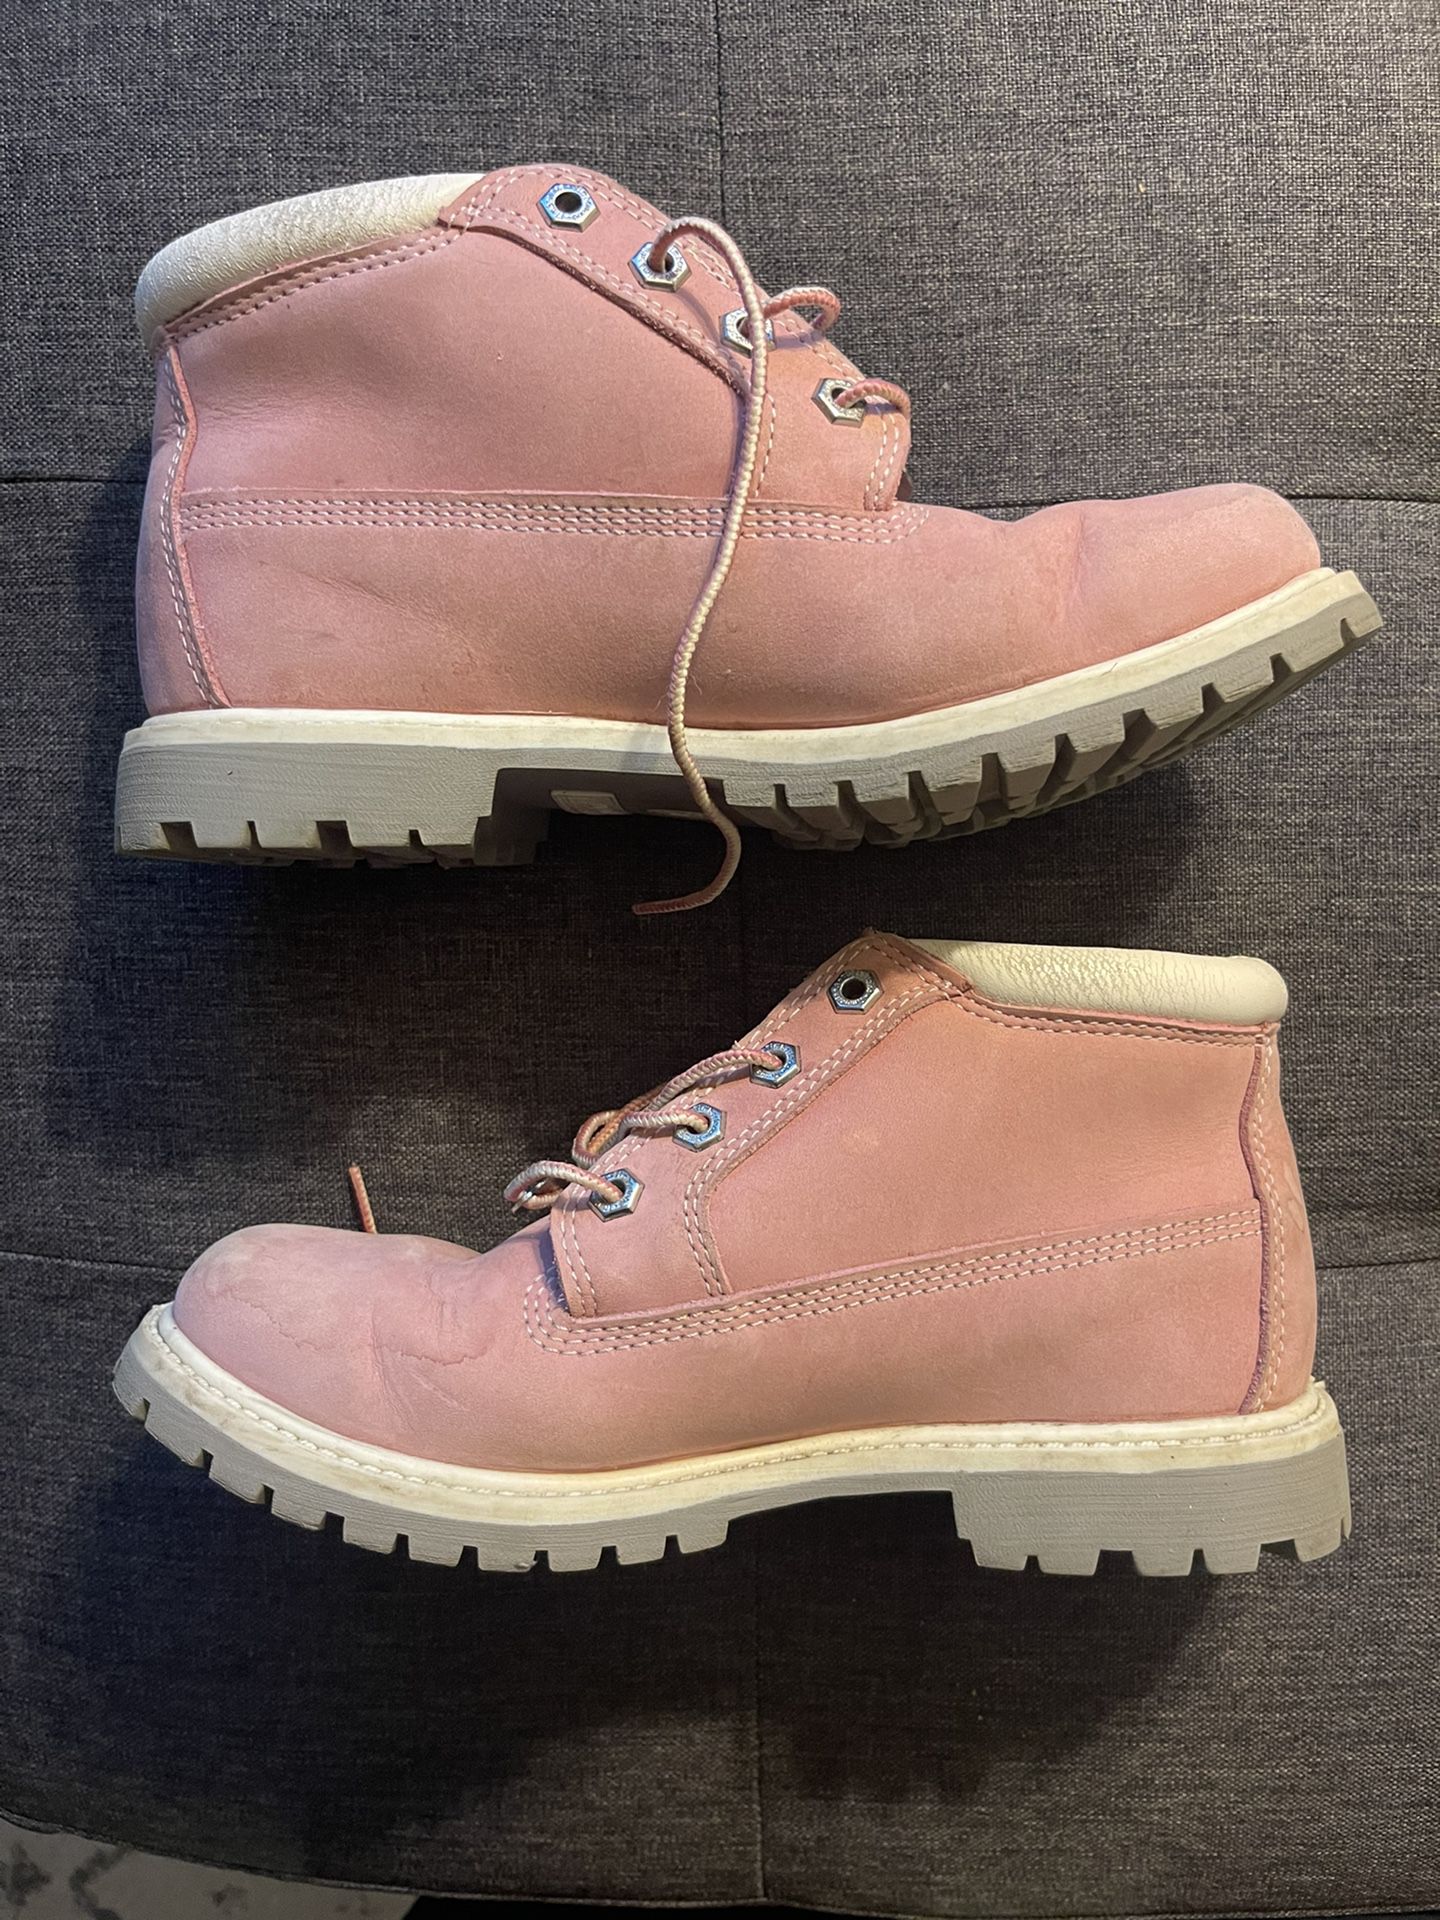 Timberland Boots Pink Size 7.5 